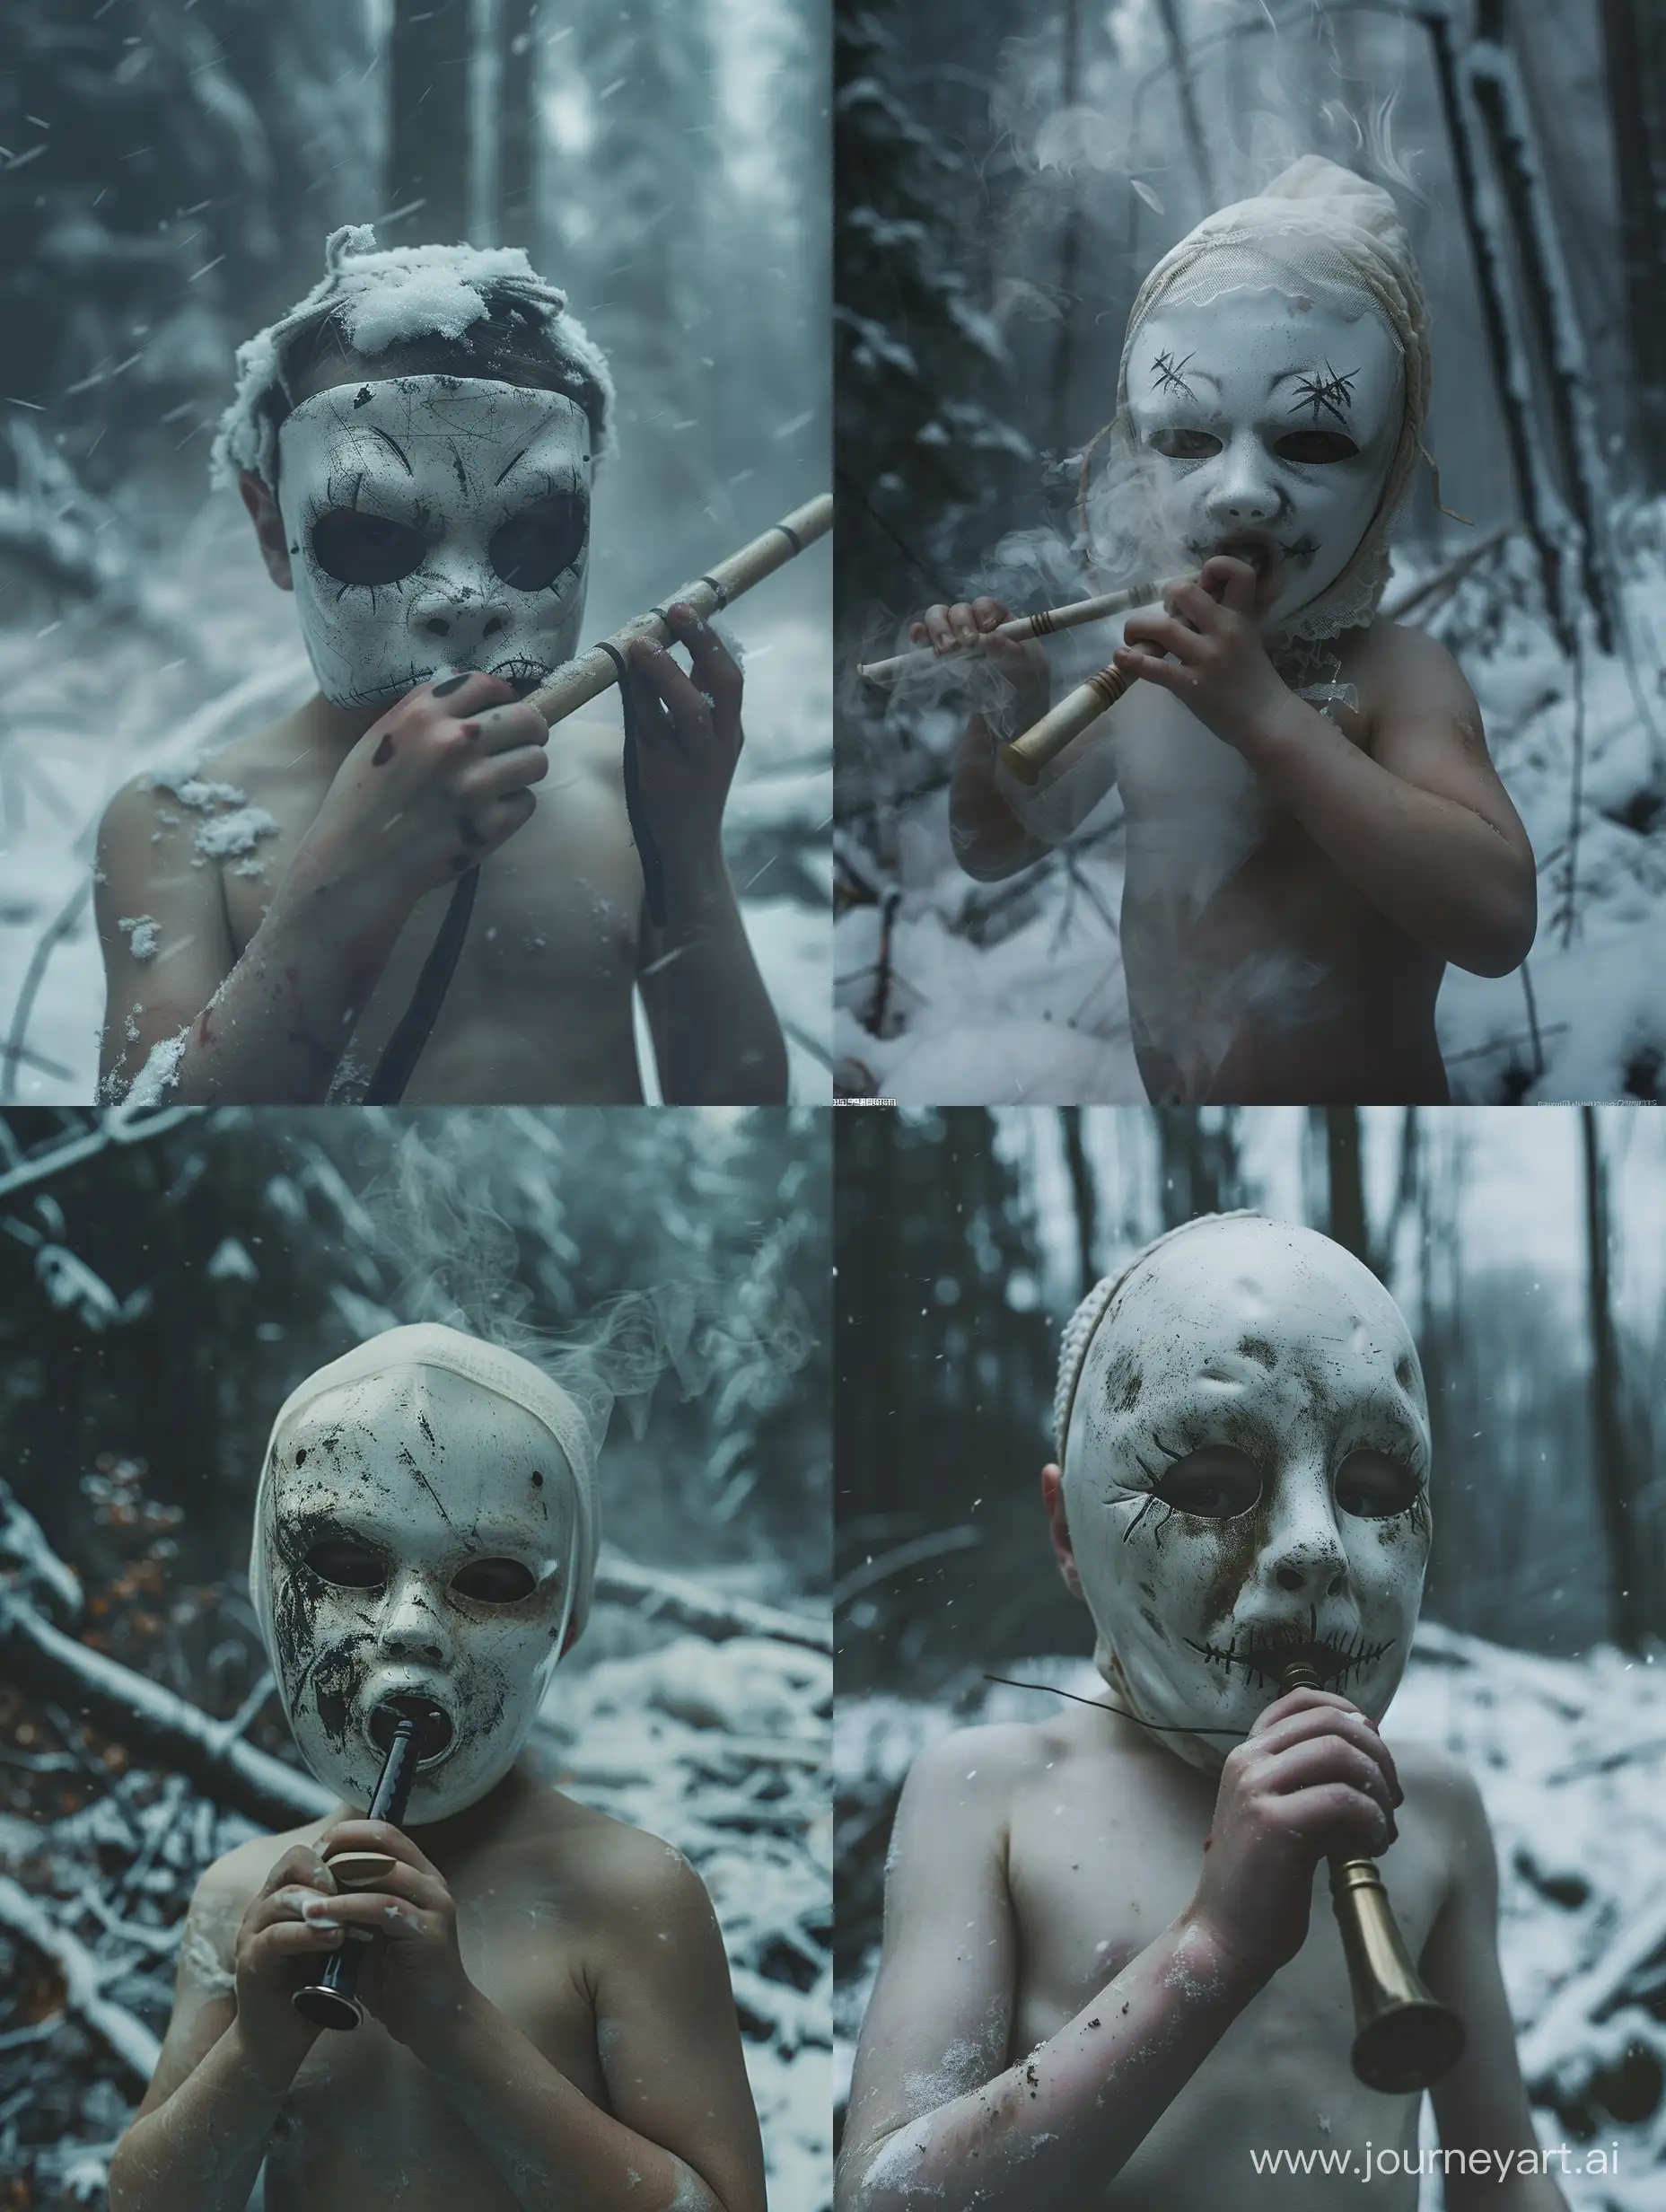 photography, realistic, full body,a child with a scary white mask makes sounds using an instrument in his mouth,dark, chaos, snowy area in the forest, mist,